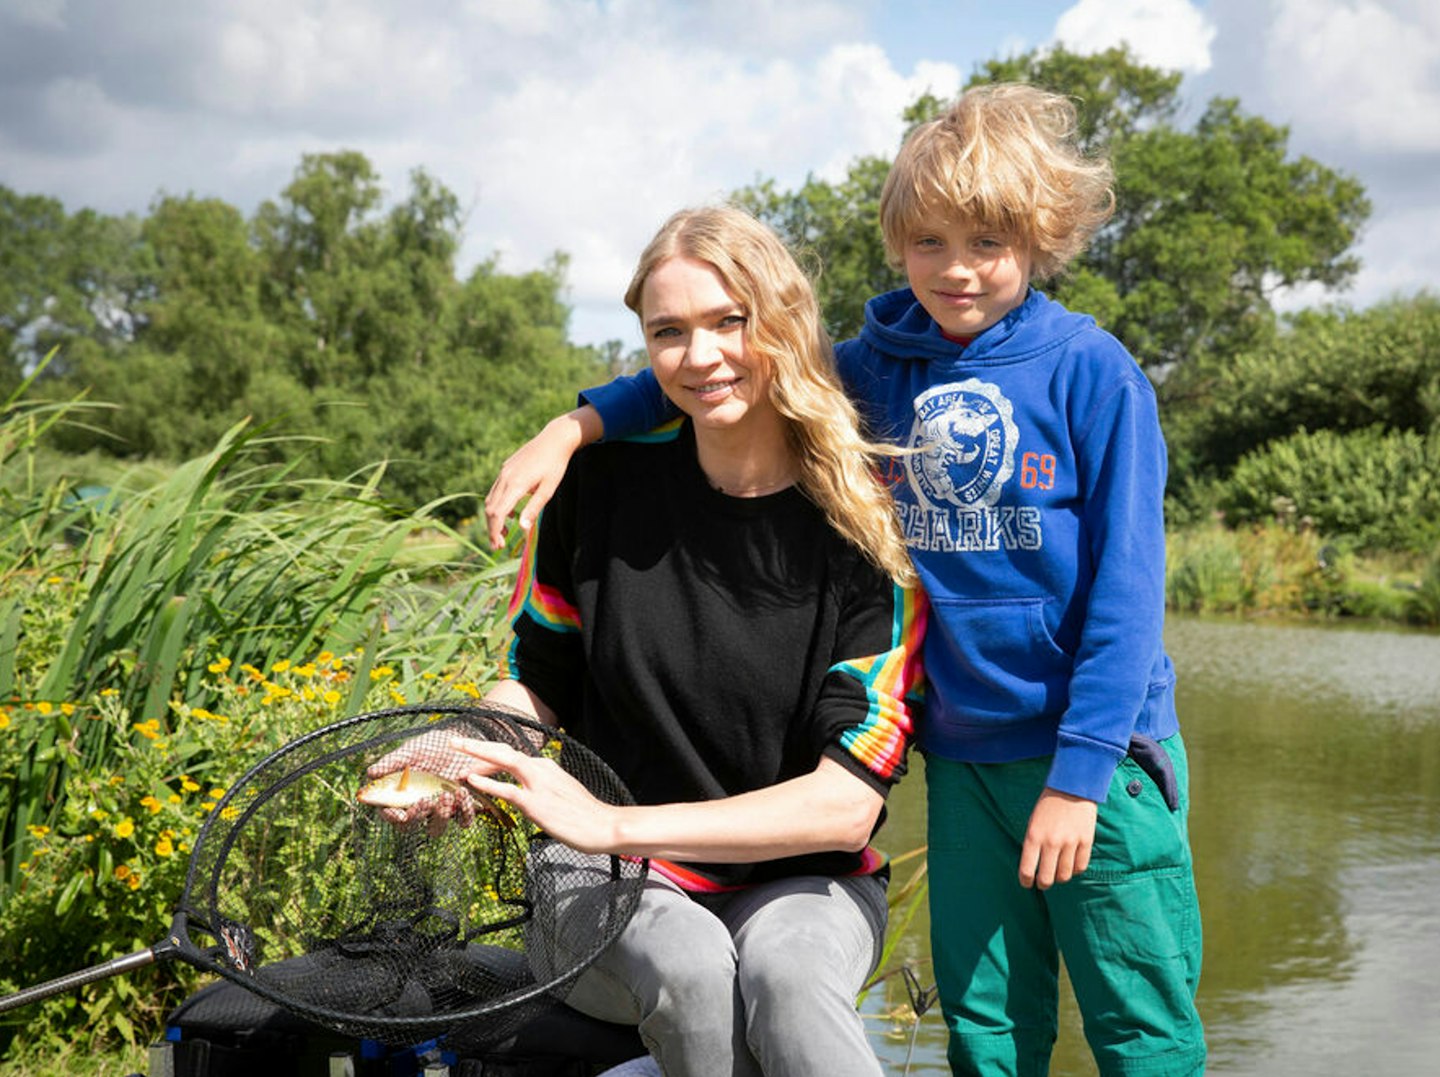 Fashion model and racing driver Jodie Kidd urged kids and families to give angling a go